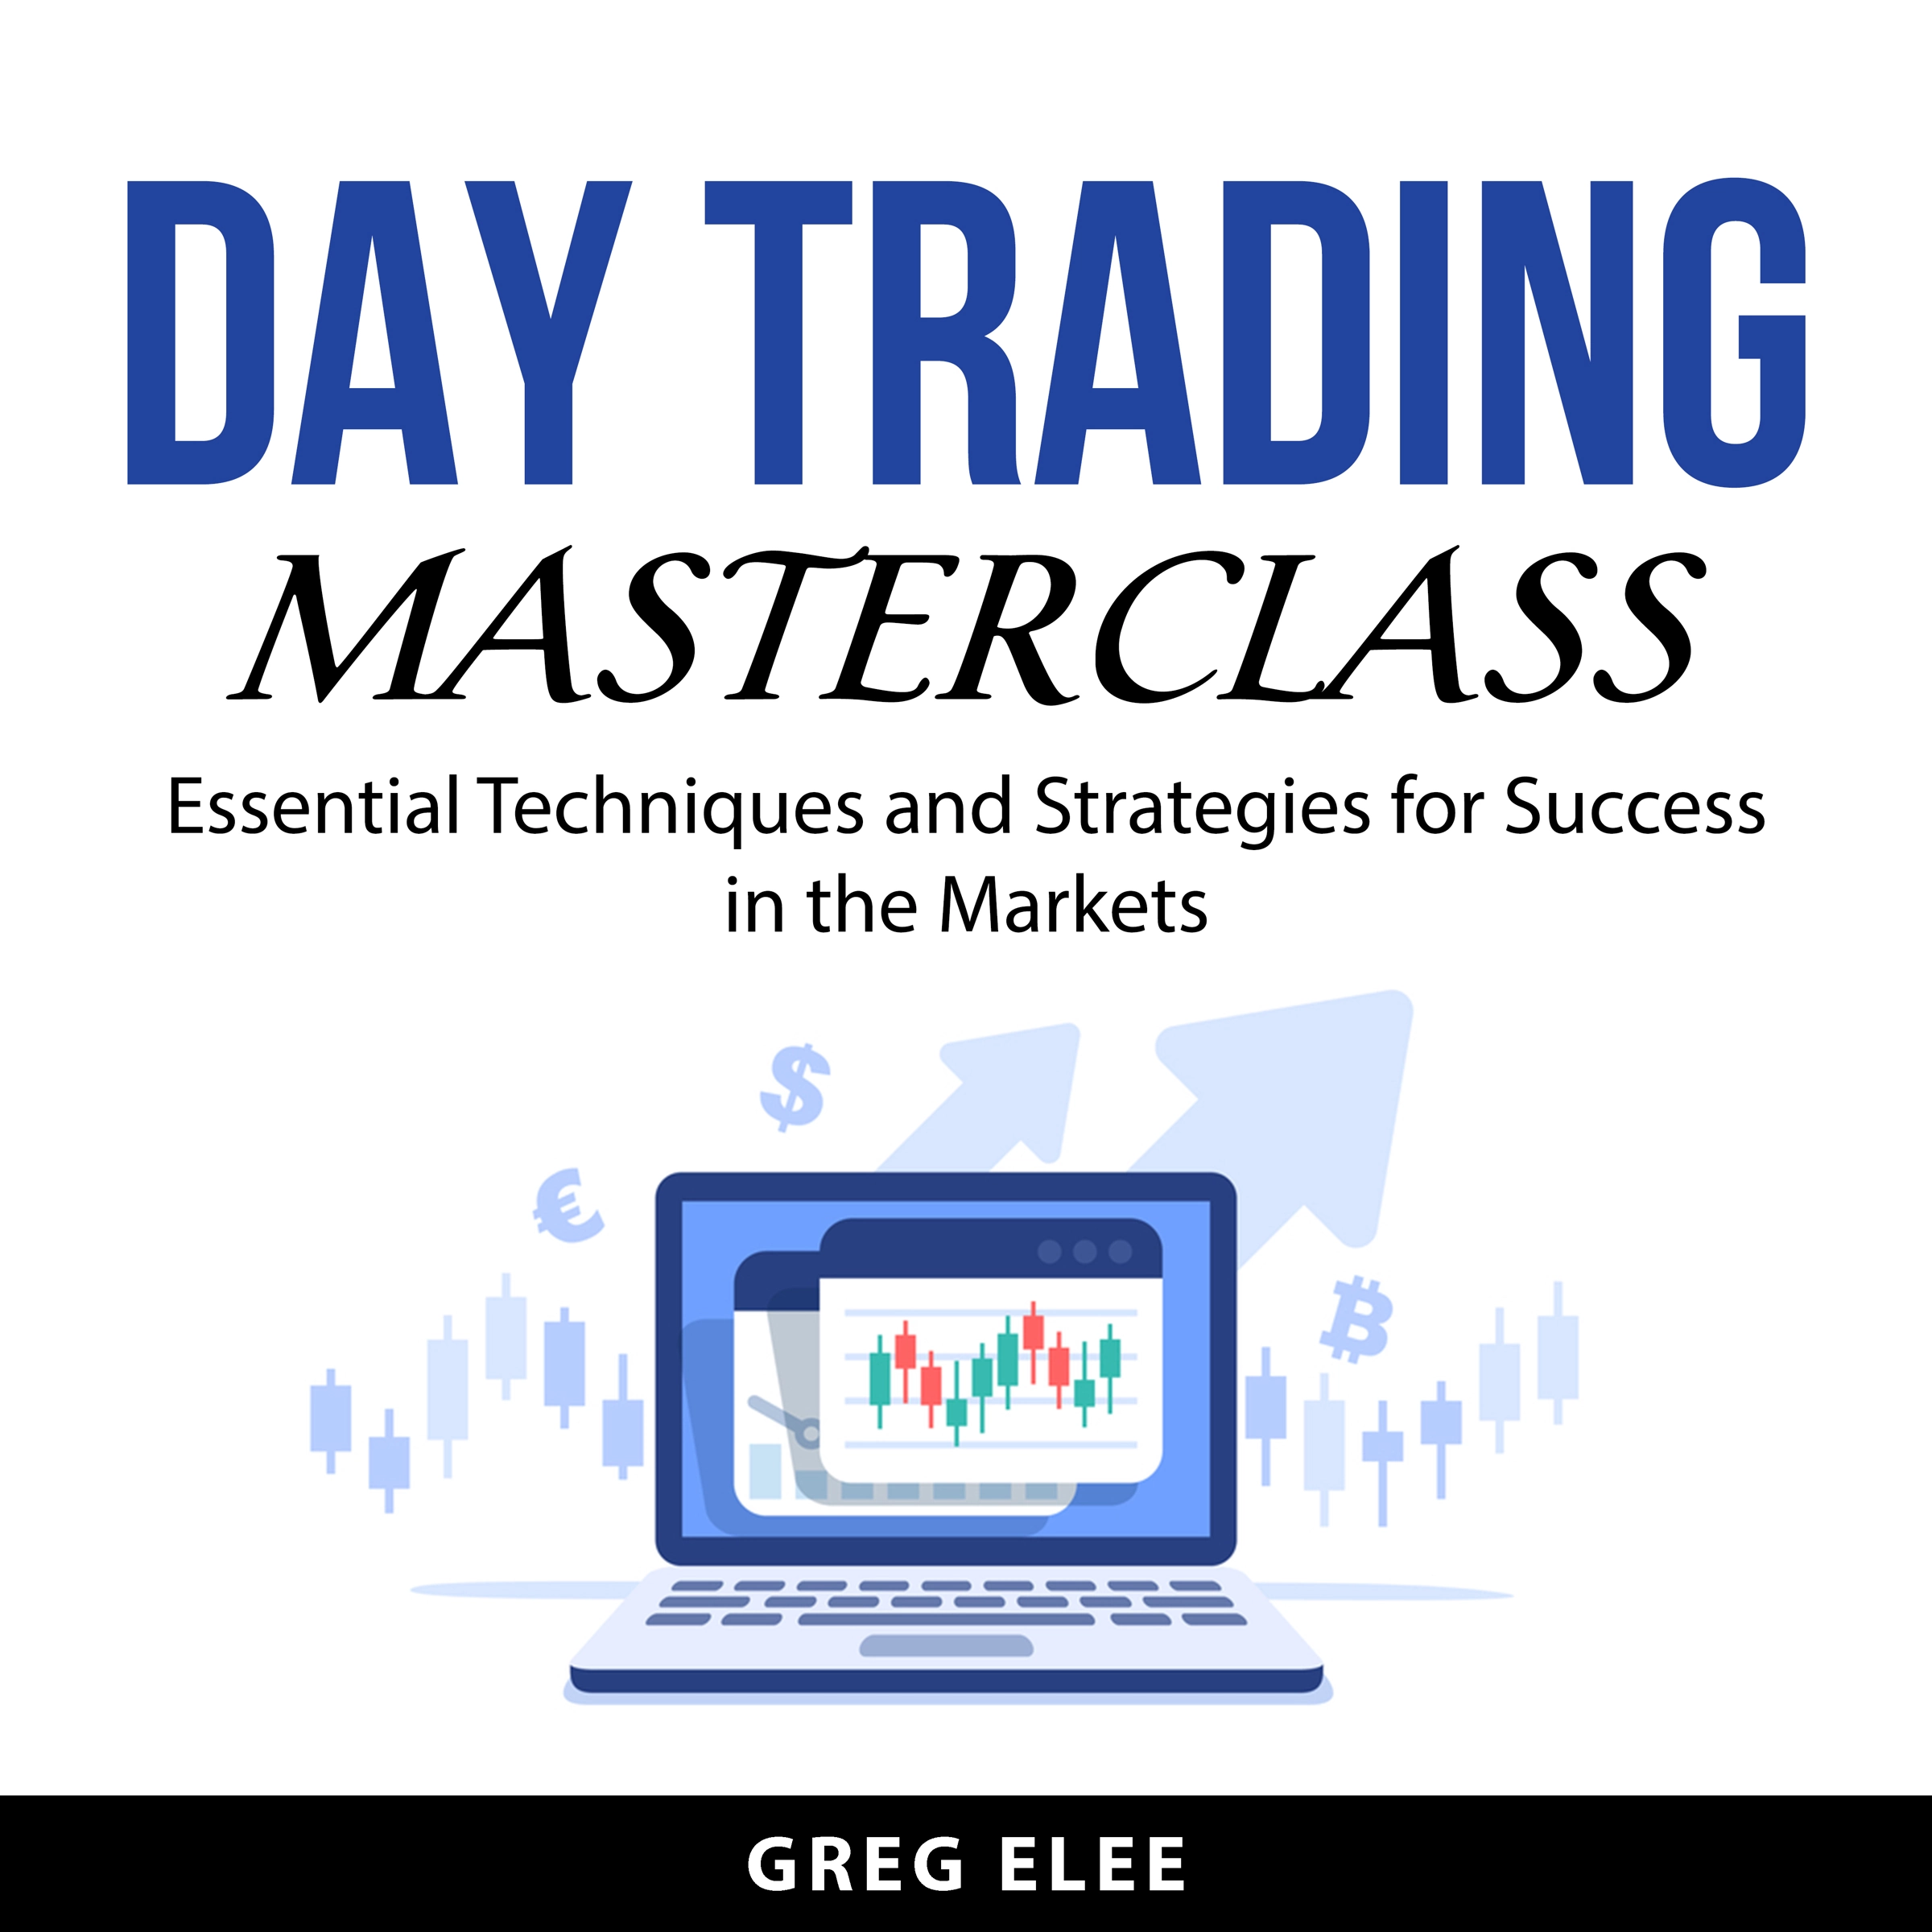 Day Trading Masterclass by Greg Elee Audiobook